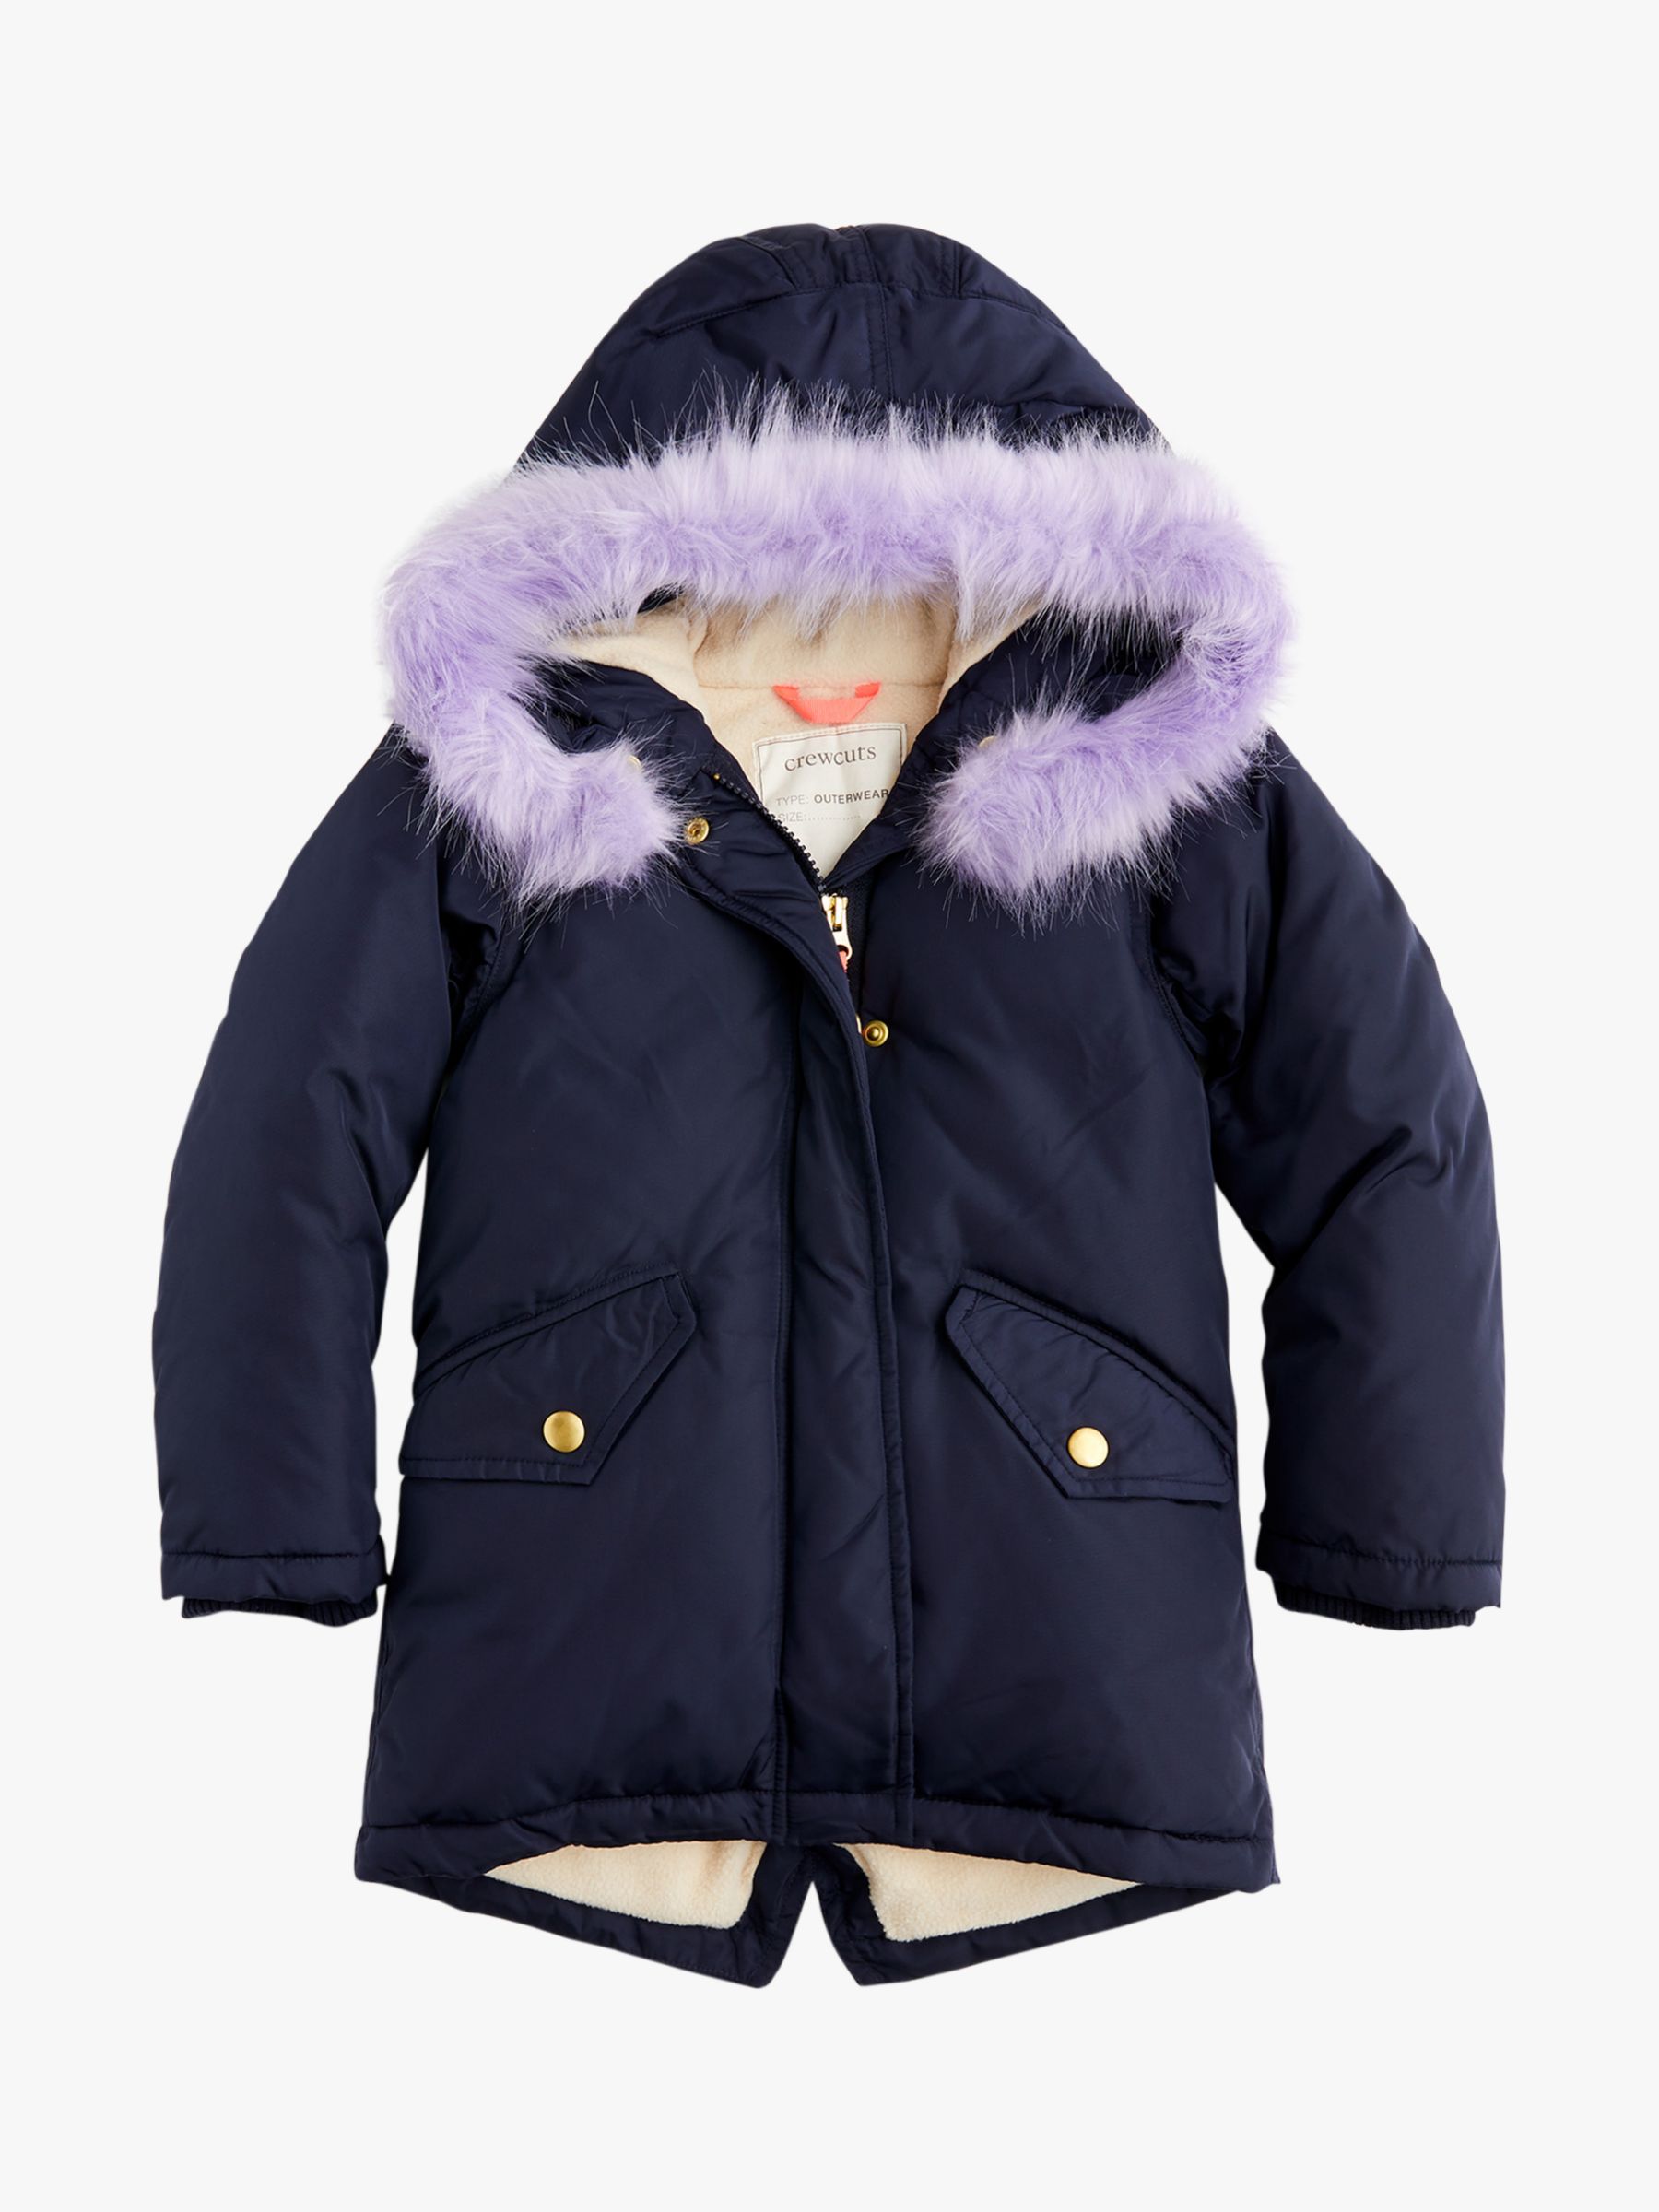 crewcuts by J.Crew Girls' Solid Puffer Jacket, Navy at John Lewis